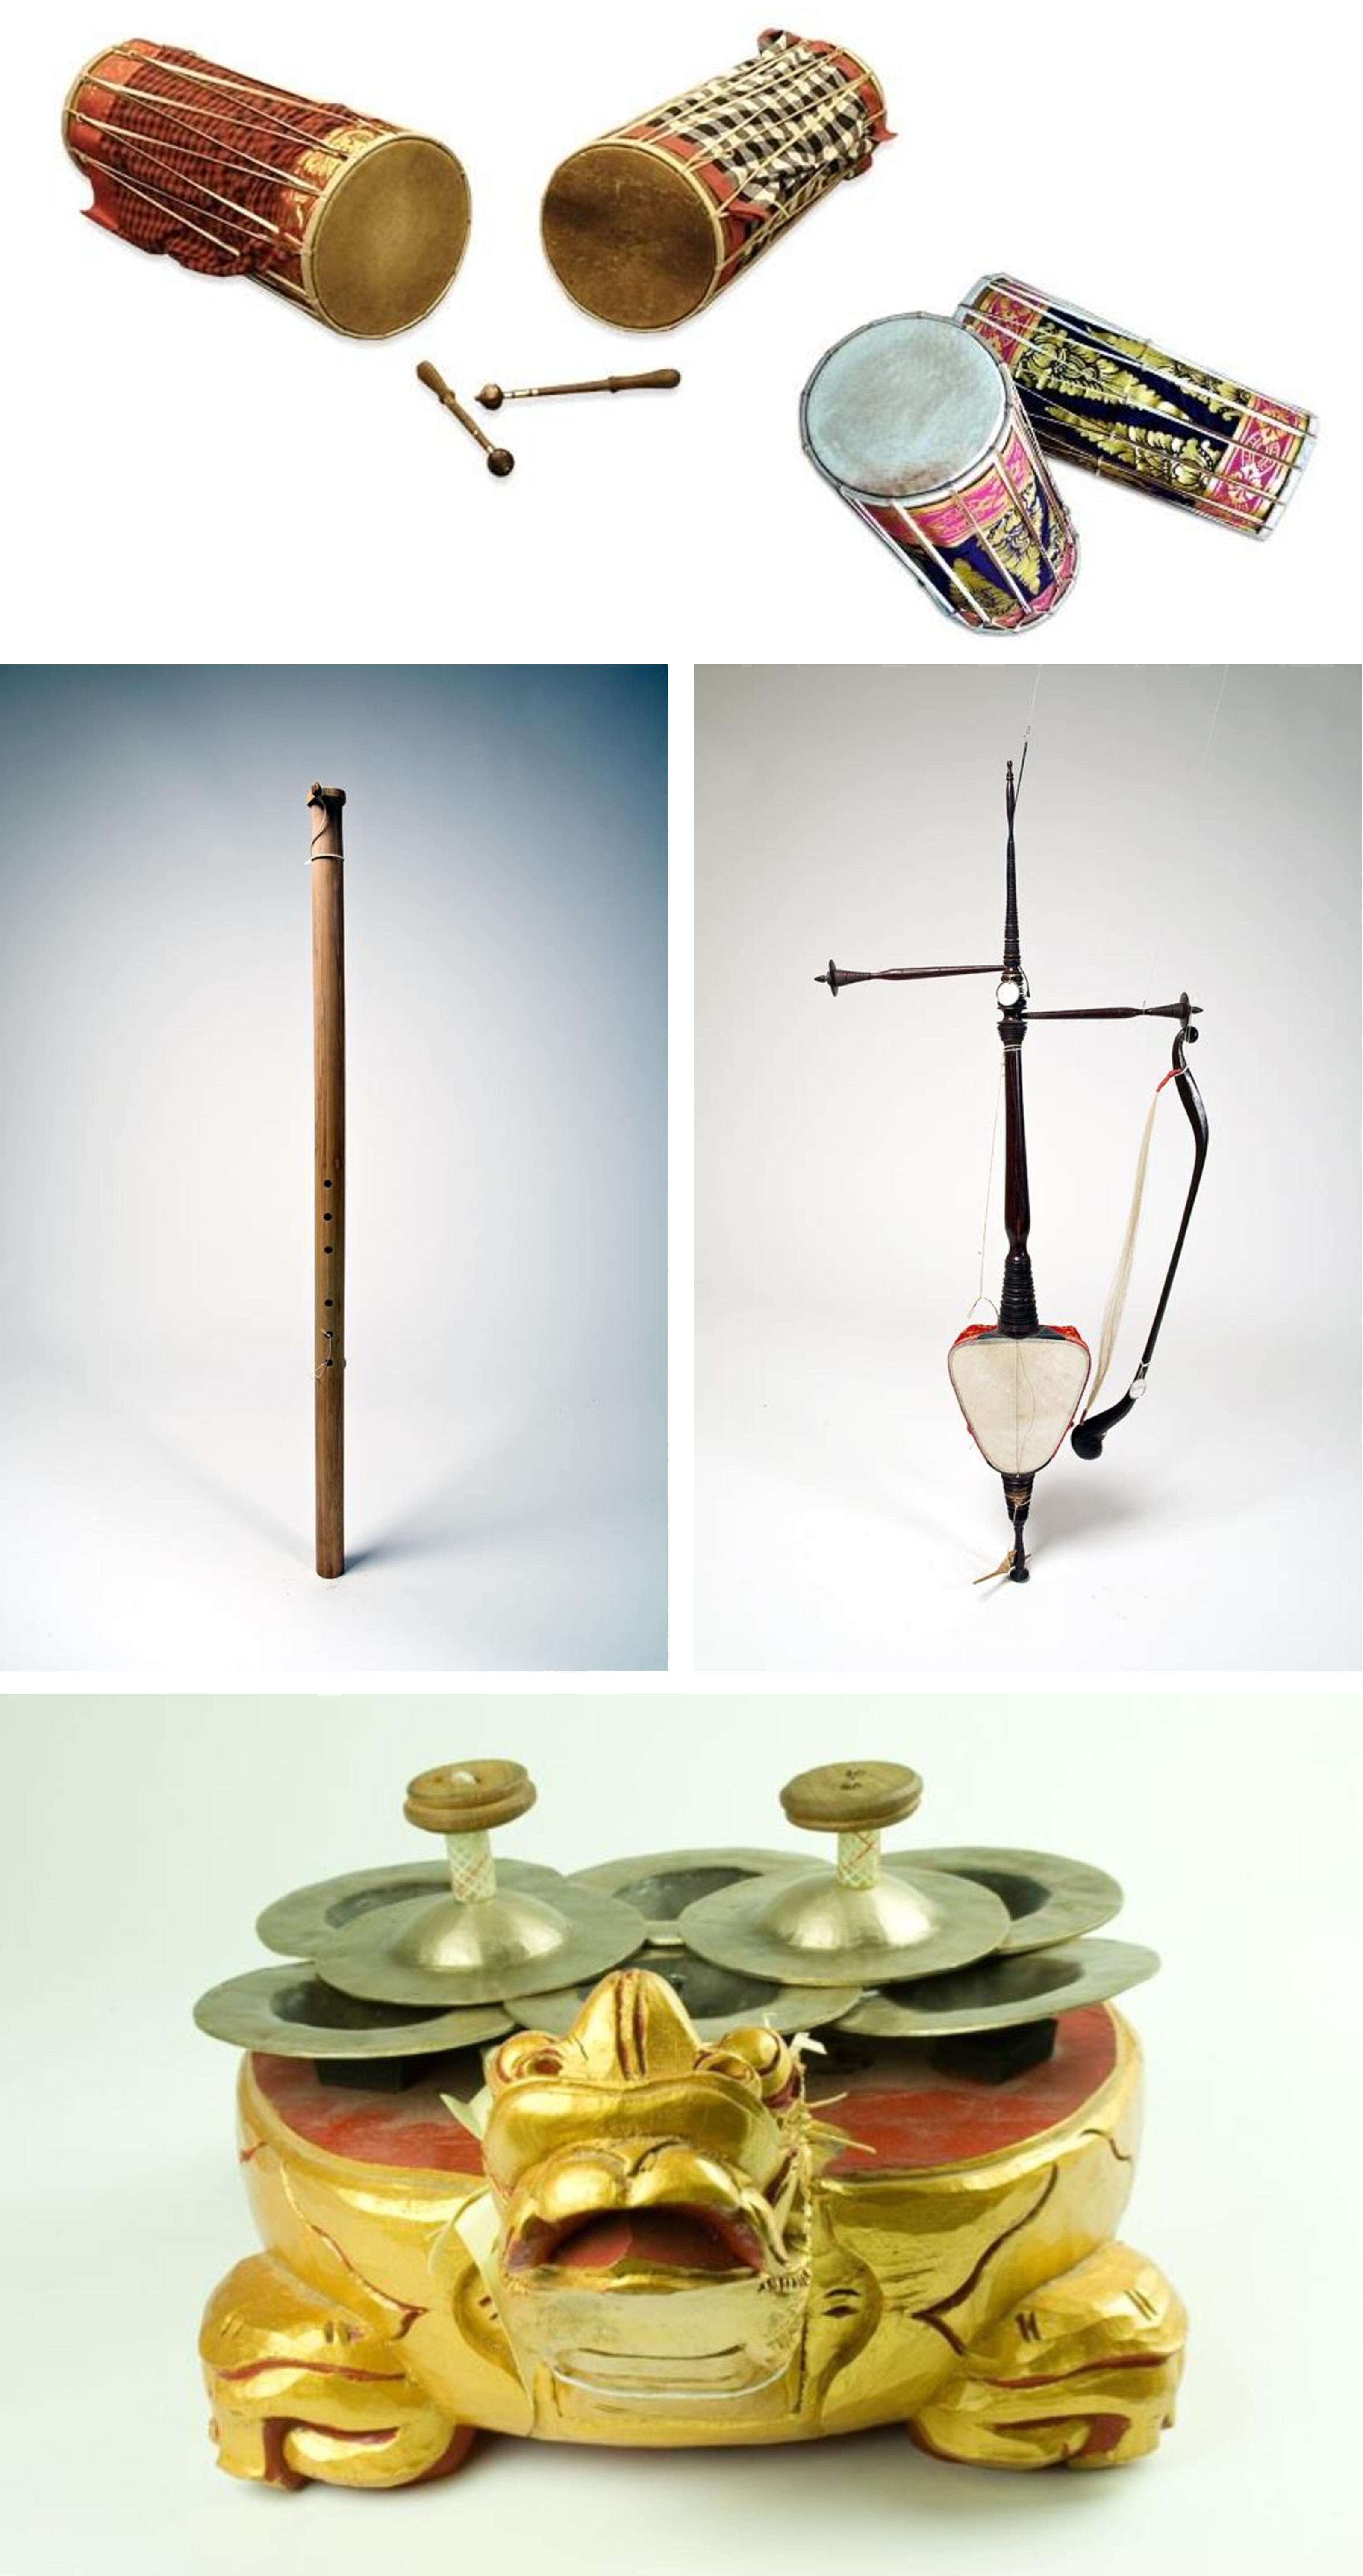 Kendang (top), suling (middle left), rebab (middle right), ceng-ceng (bottom)